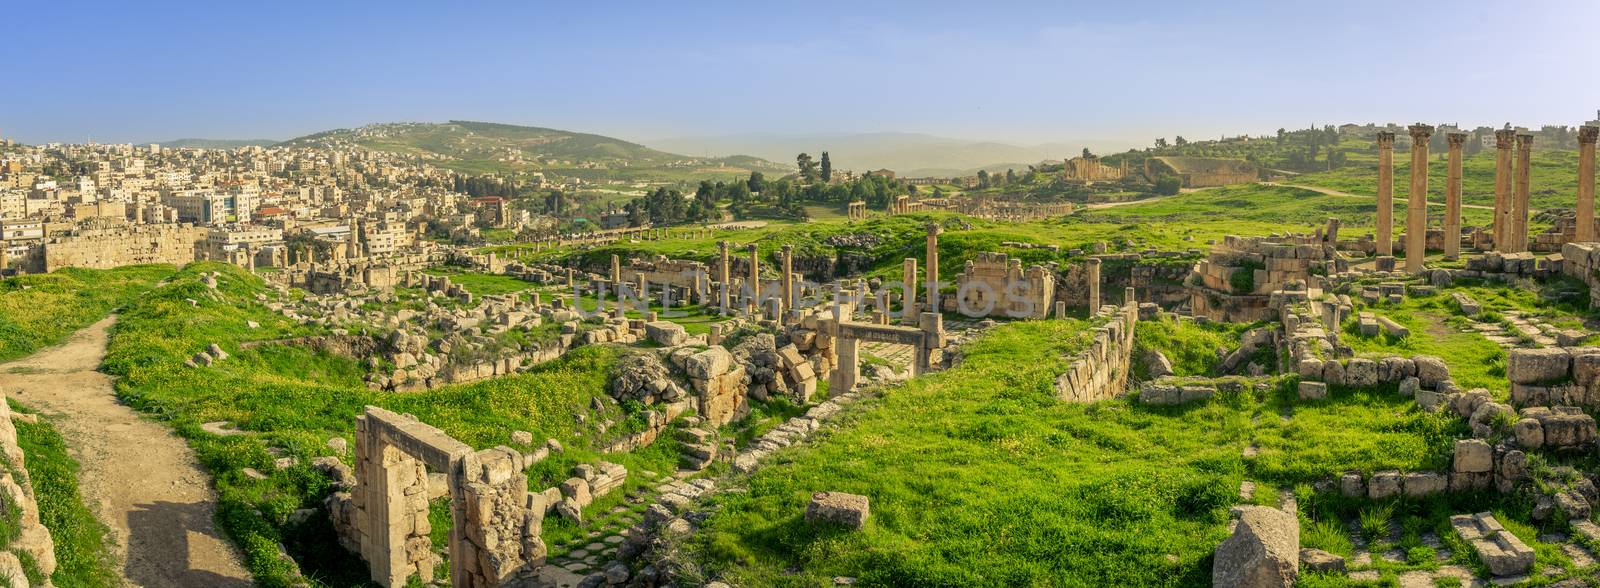 Panorama overview of the Roman site of Gerasa, Jerash, Jordan, with ruins, pillars and remains of the old city clearly visible. Green grass and blue sky on a sunny day in spring. by kb79